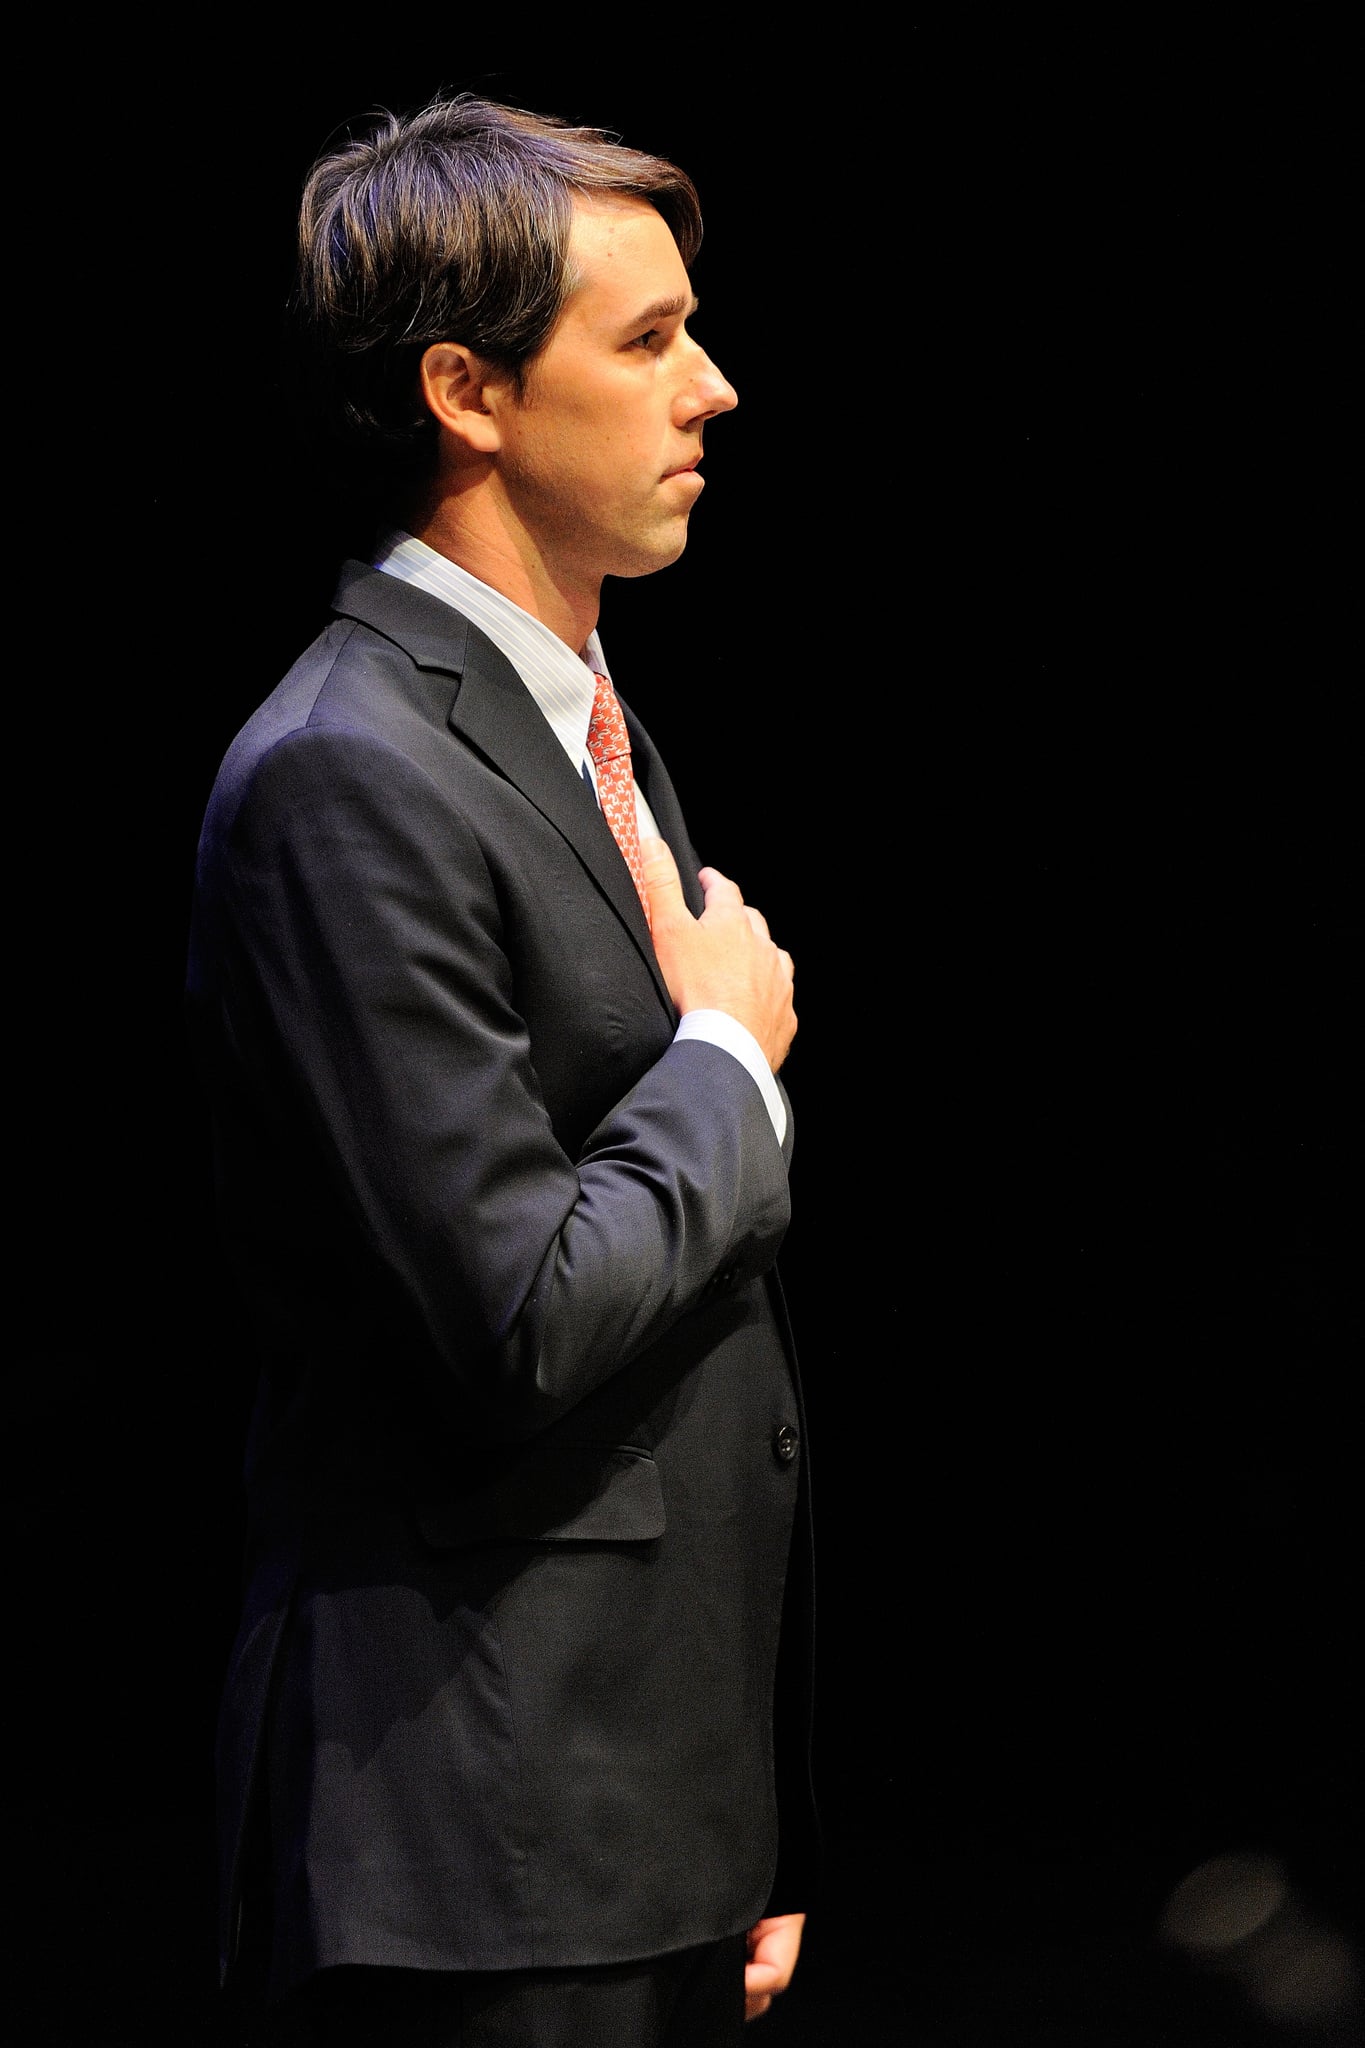 Beto O’rourke. The first ever presidential candidate — hacker